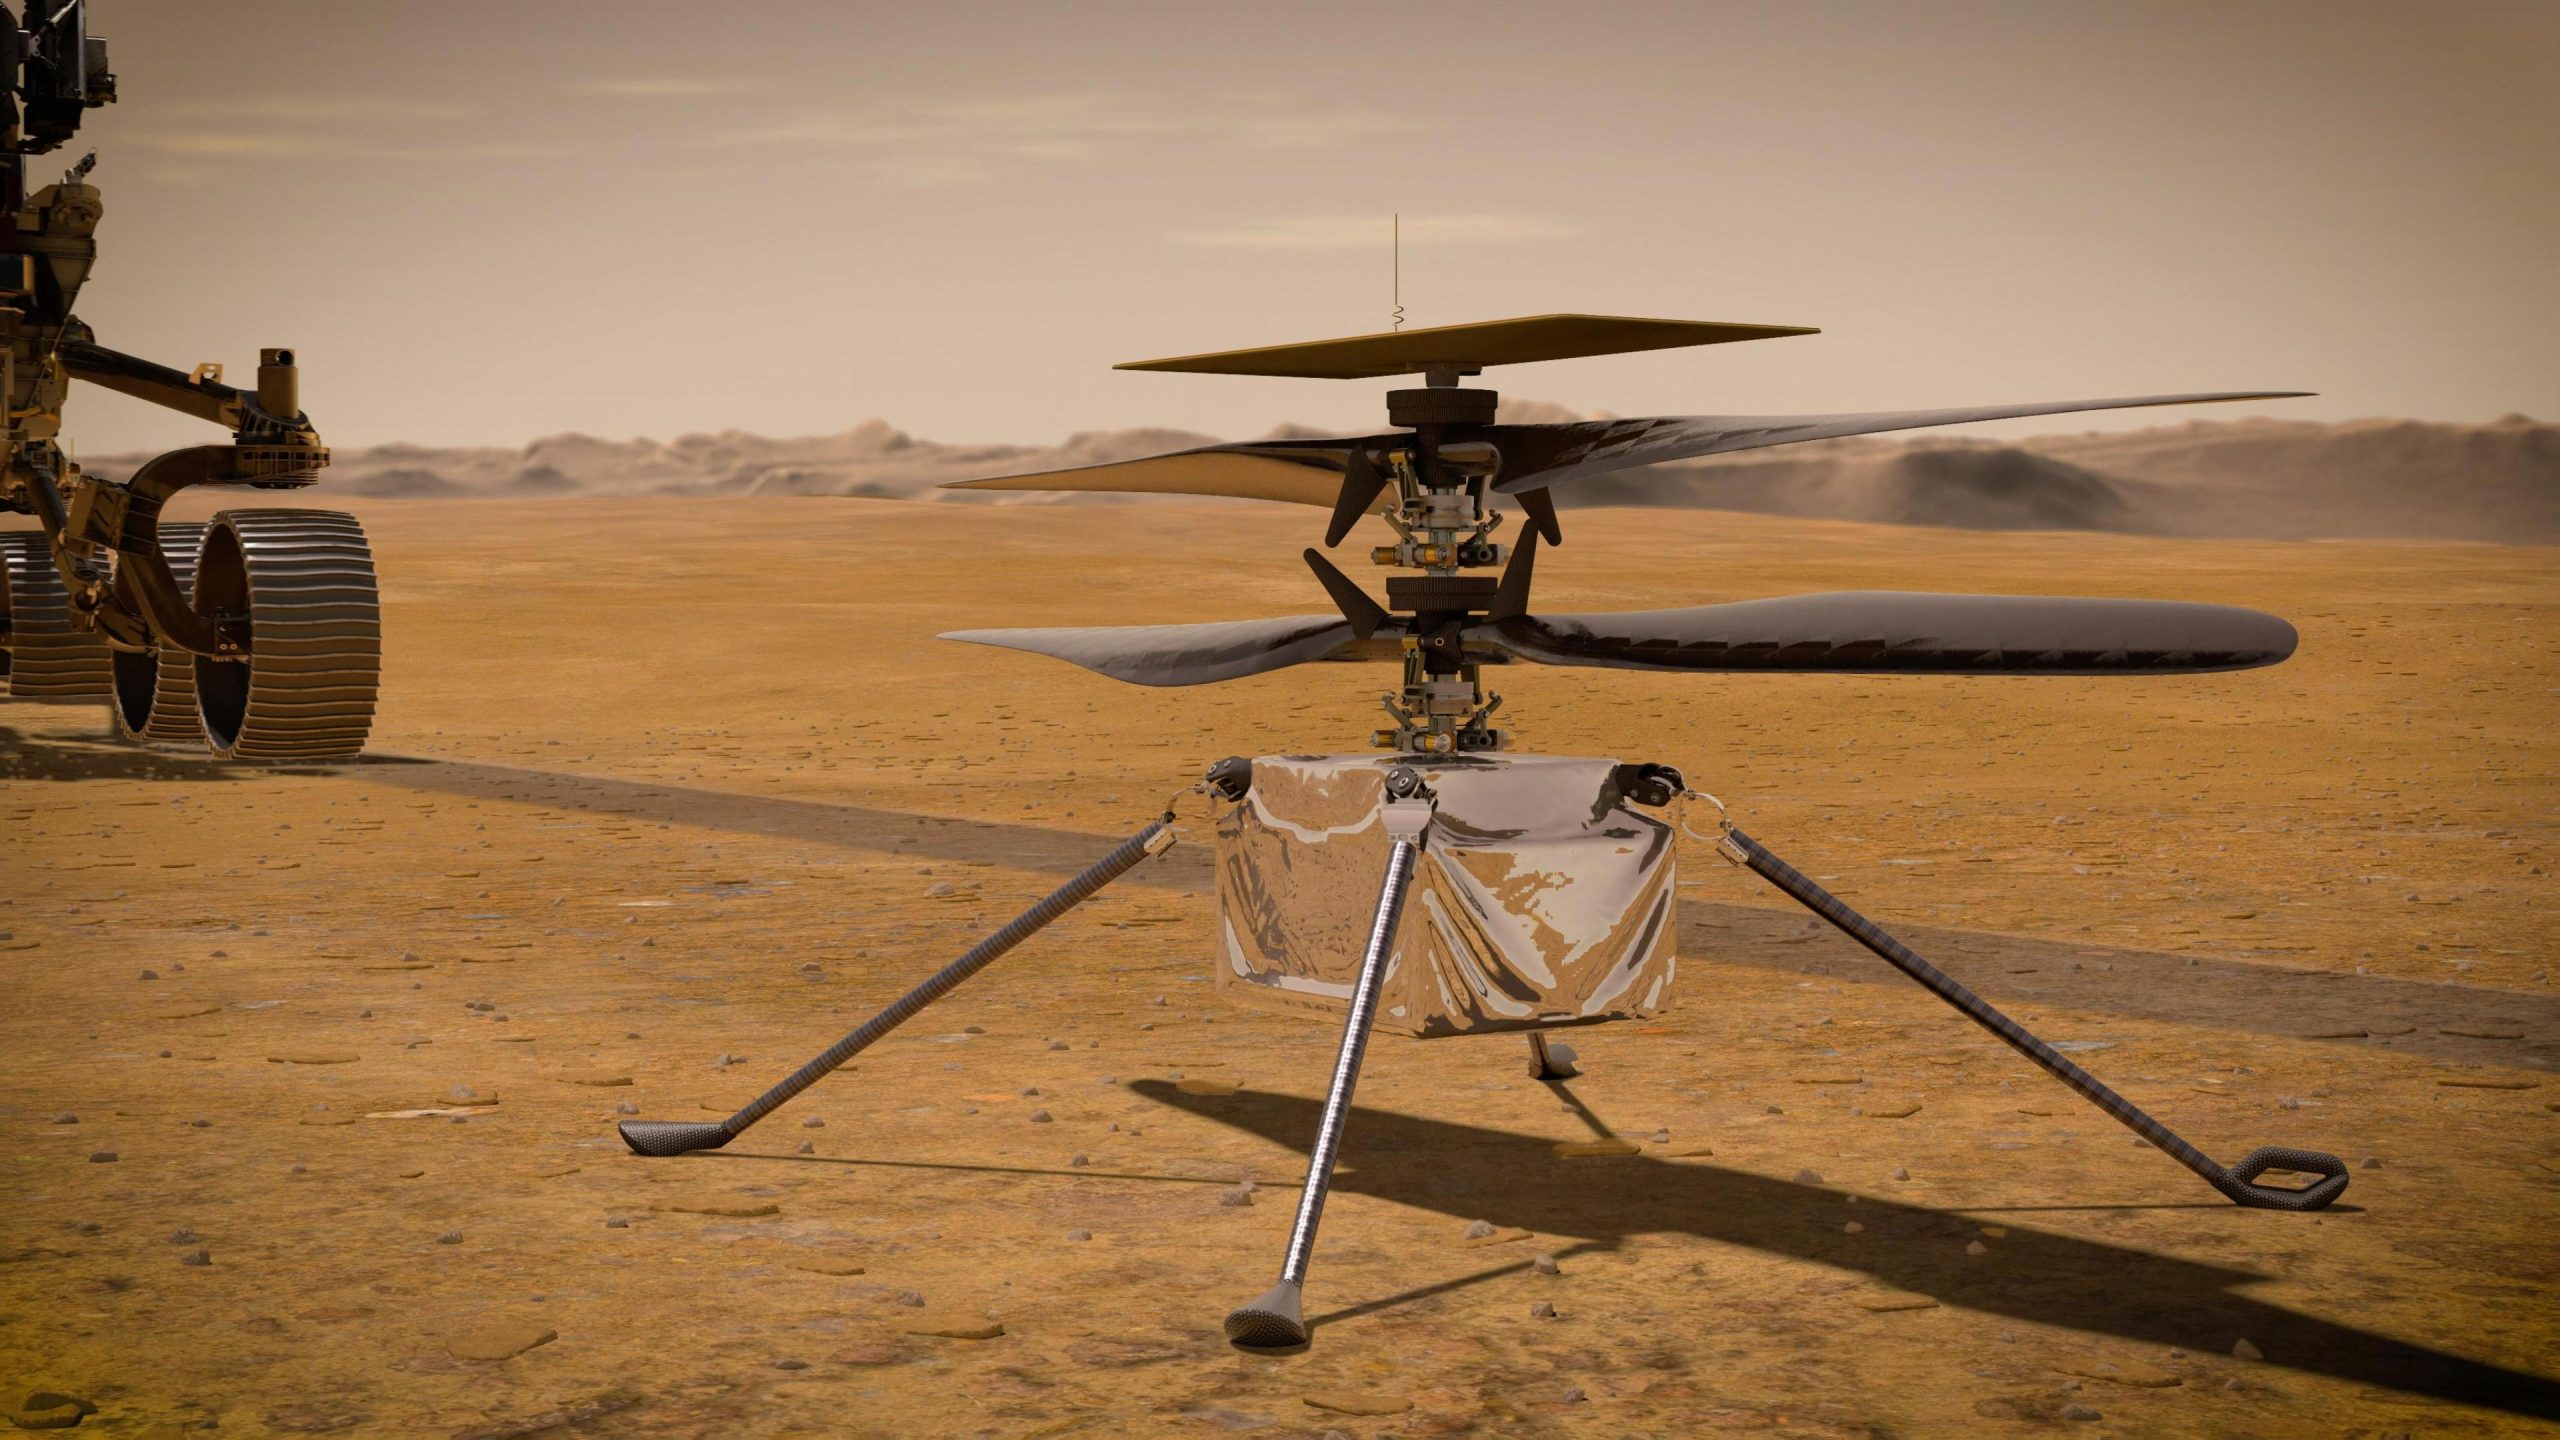 Why Did NASA Delays Mars helicopters Ingenuity's 1st Flight to April 14